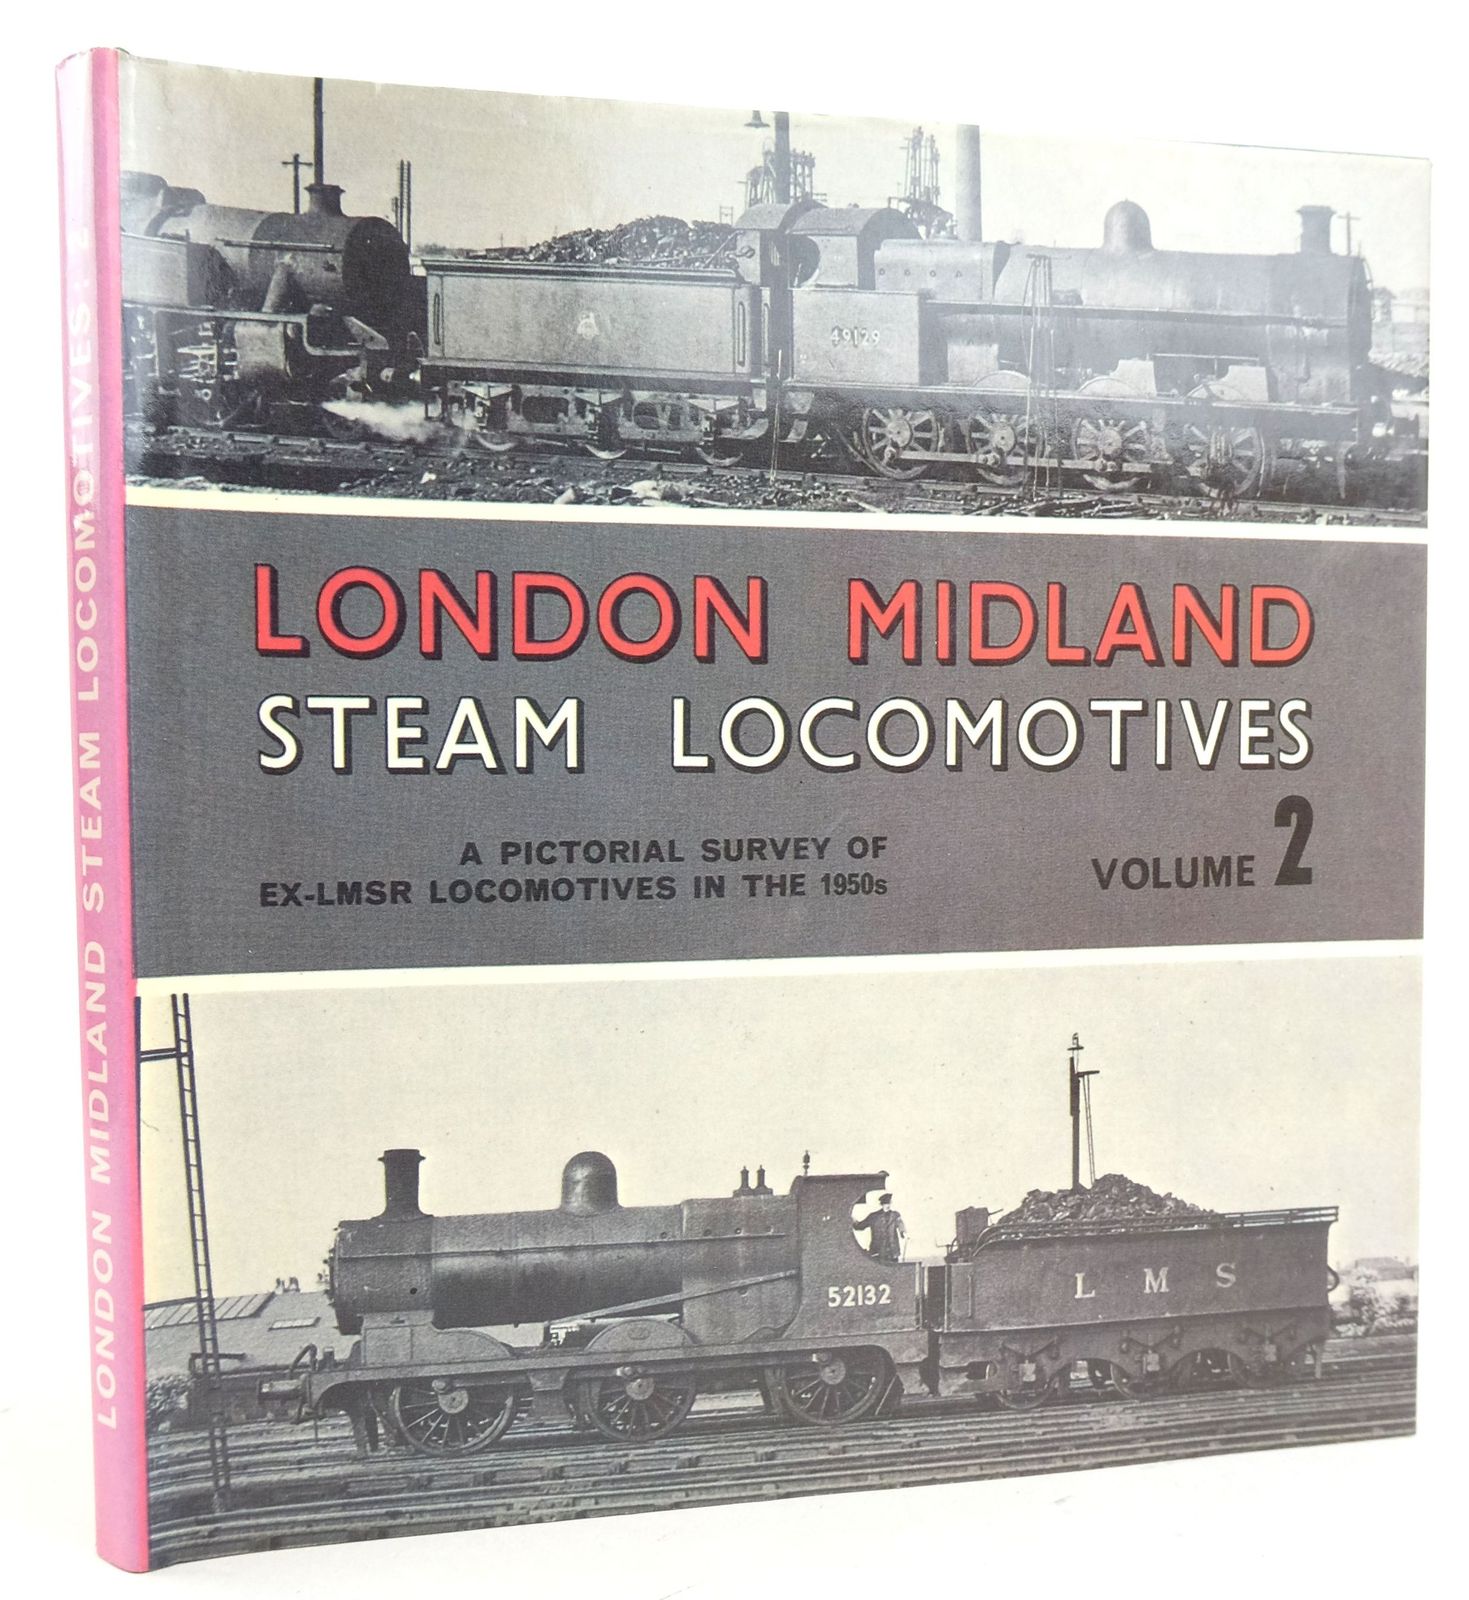 Photo of LONDON MIDLAND STEAM LOCOMOTIVES VOLUME 2 written by Morrison, Brian published by D. Bradford Barton (STOCK CODE: 1819872)  for sale by Stella & Rose's Books